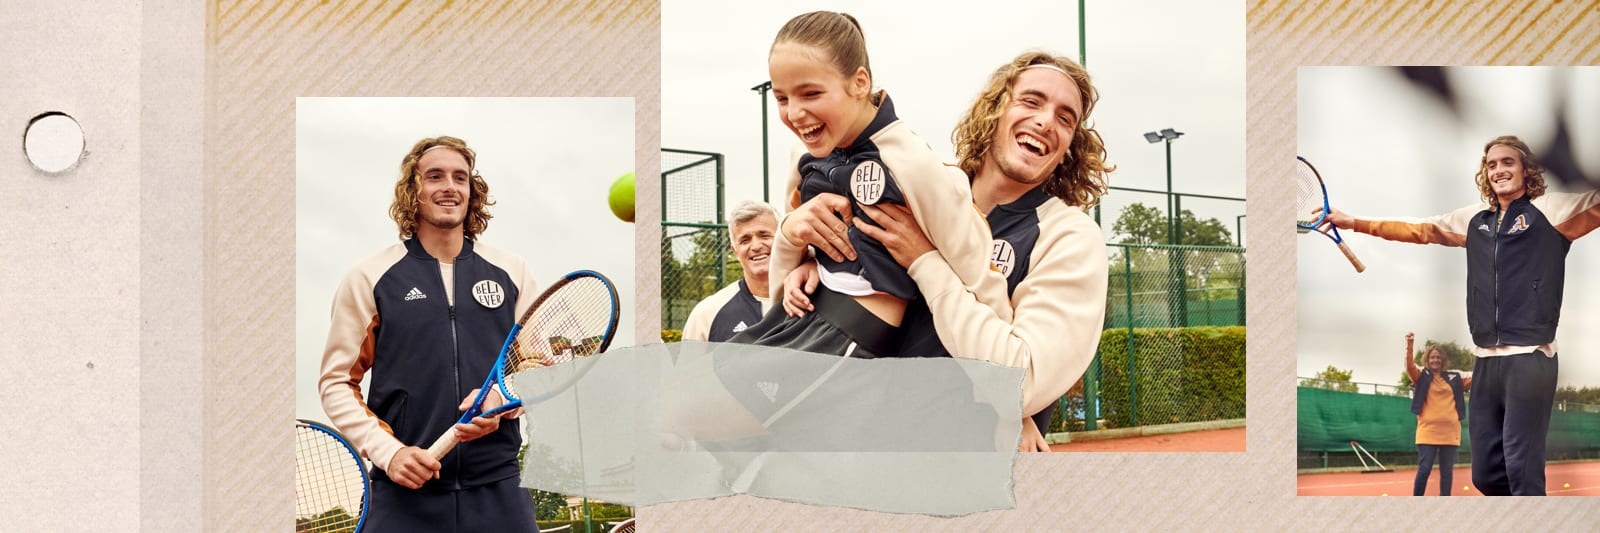 STEFANOS TSITSIPAS: BELIEVE IN DOING WHAT YOU CAN'T